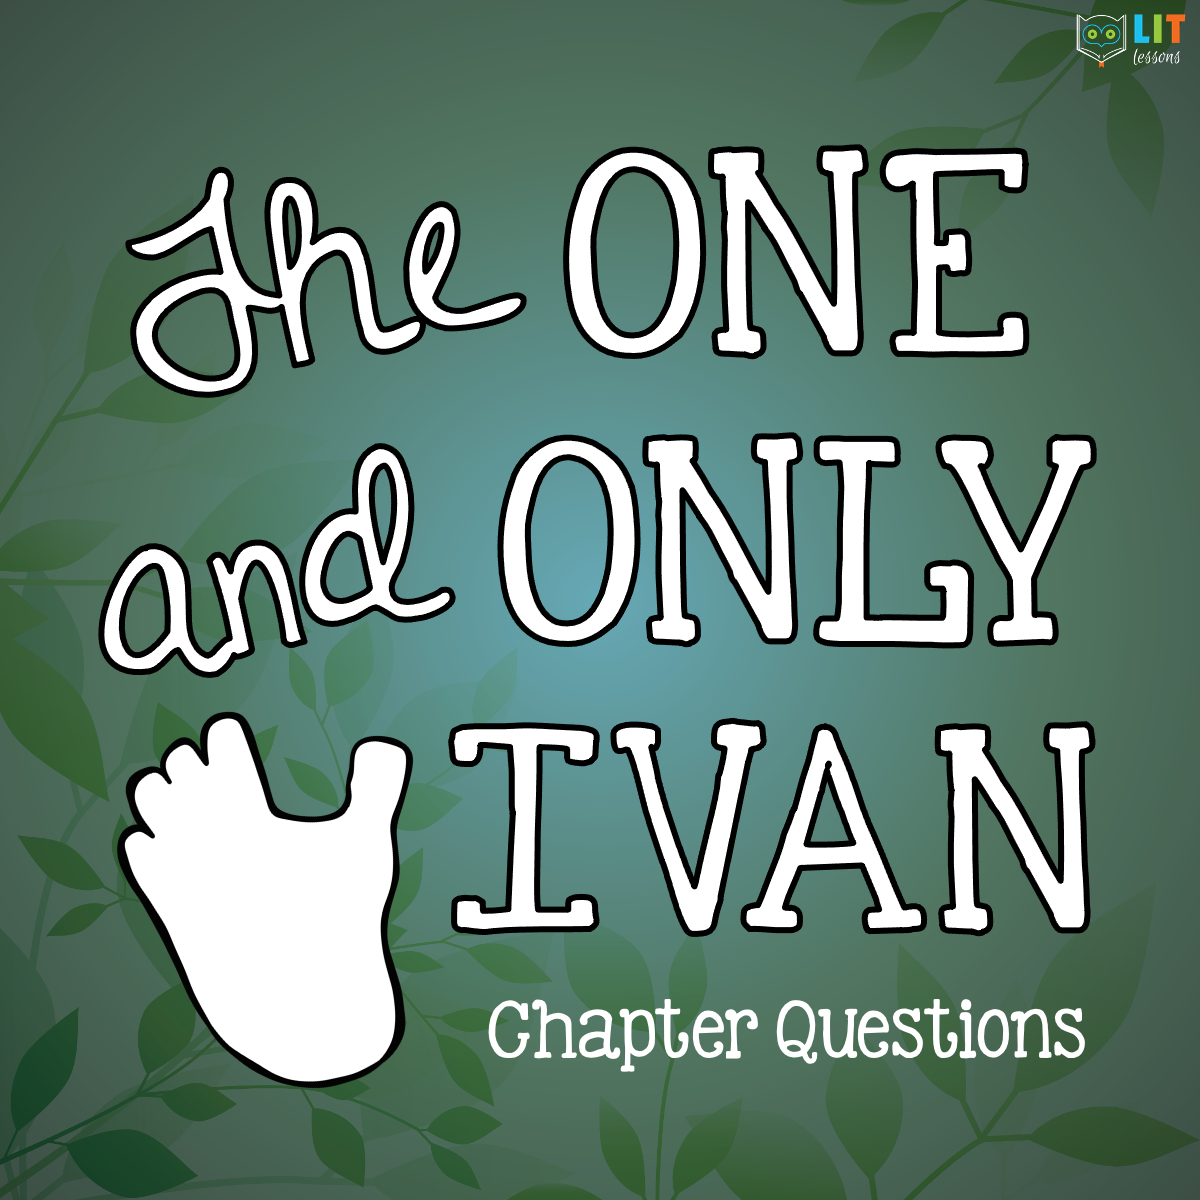 The One and Only Ivan Chapter Questions